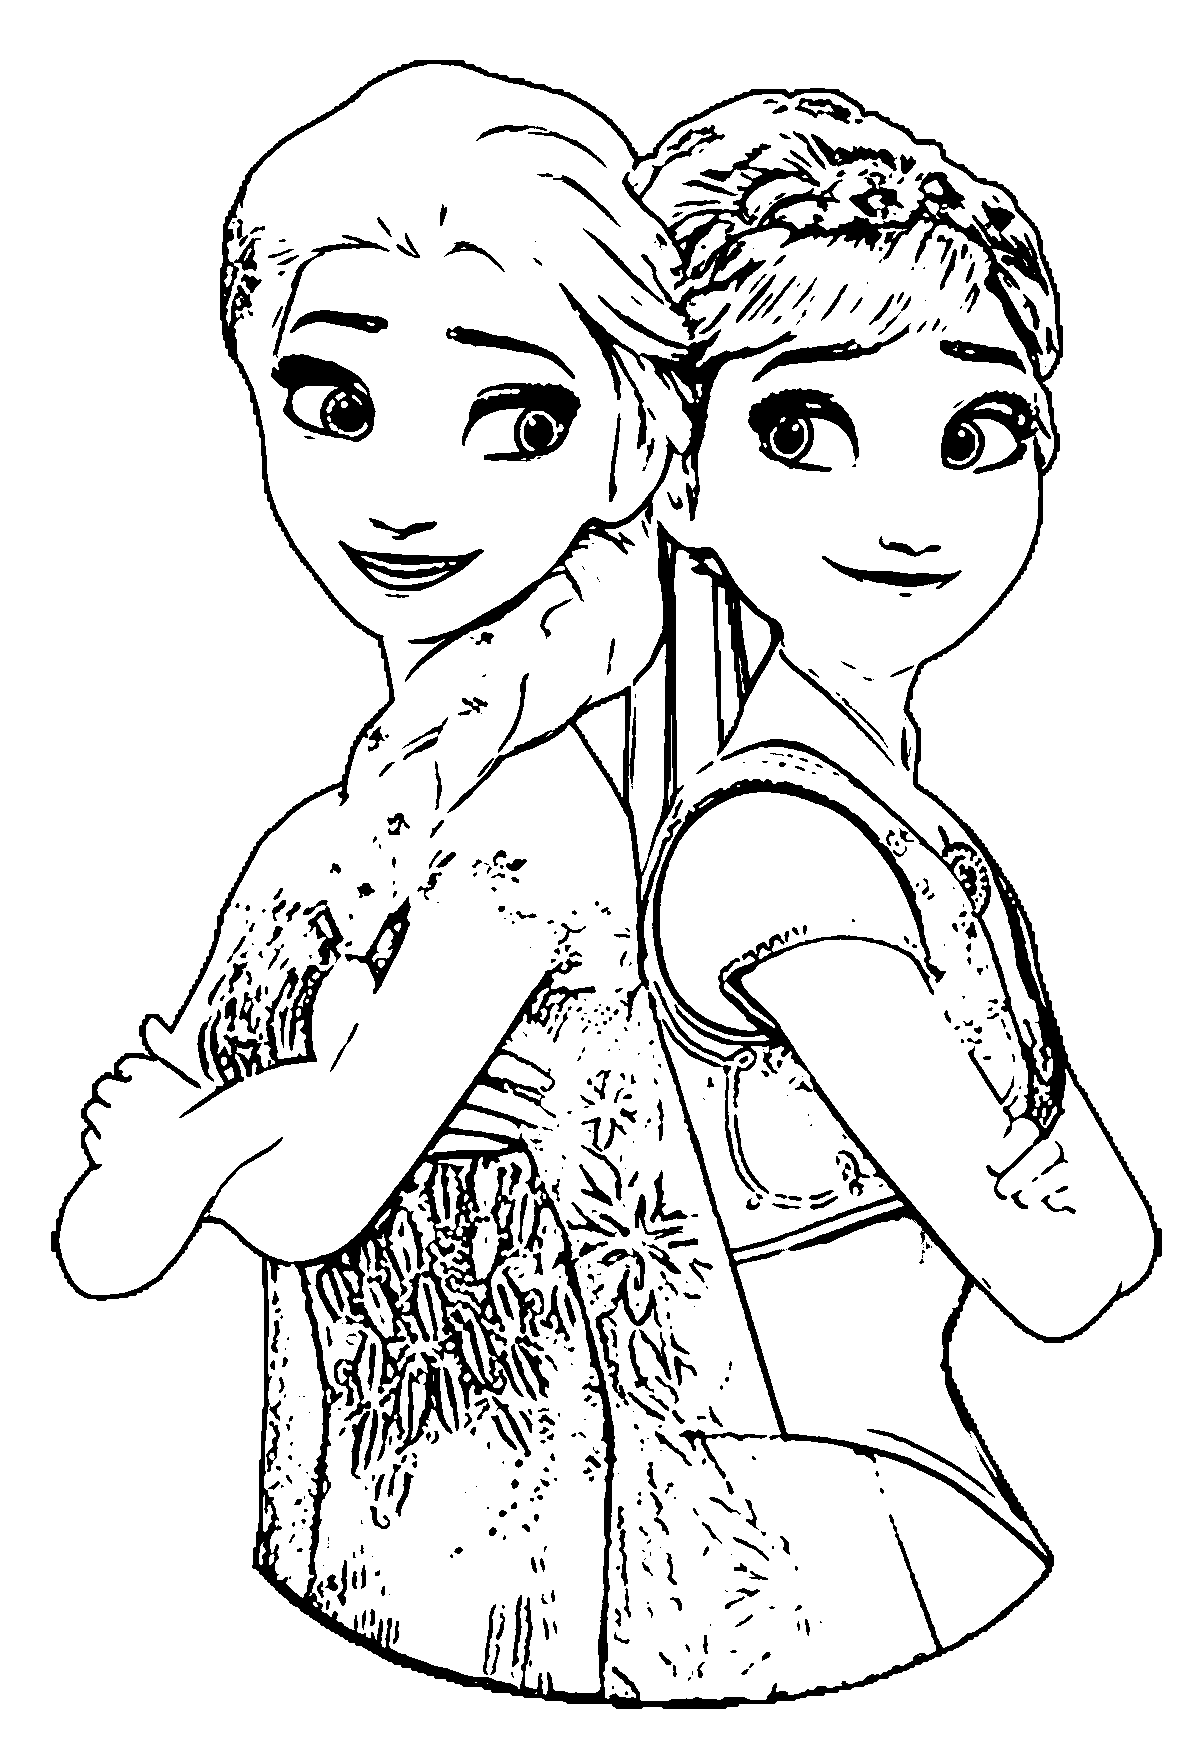 Fever Elsa_anna Upper Bodies Coloring Page | Wecoloringpage